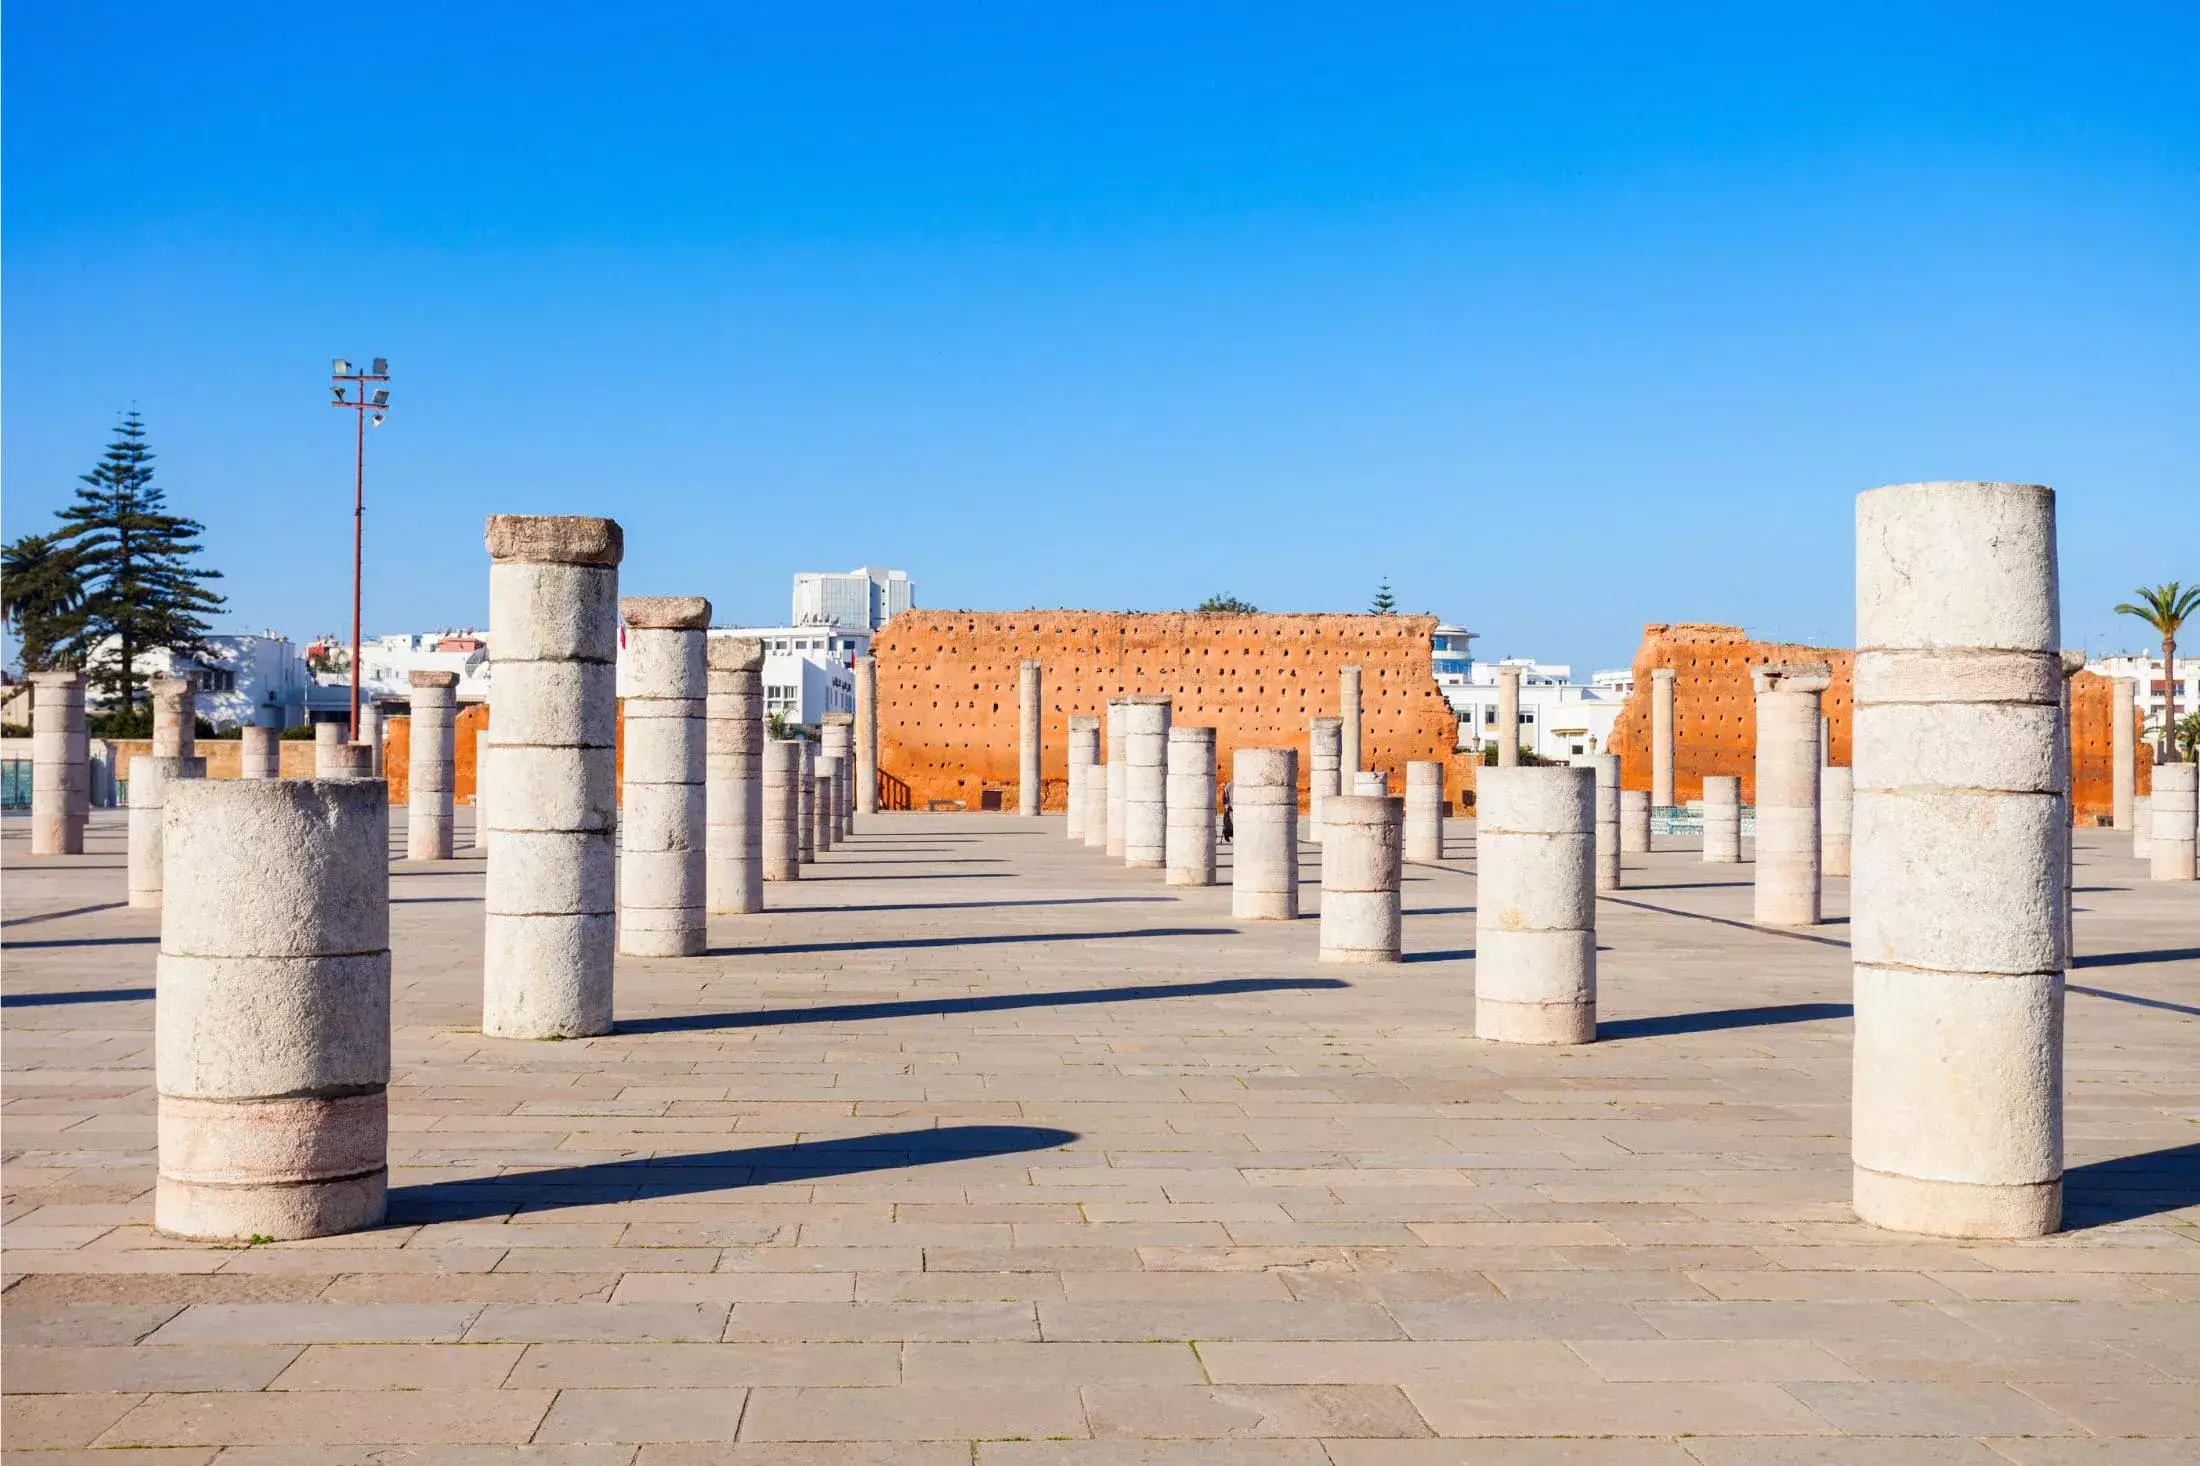 Stone columns at the site of Hassan Tower in Morocco